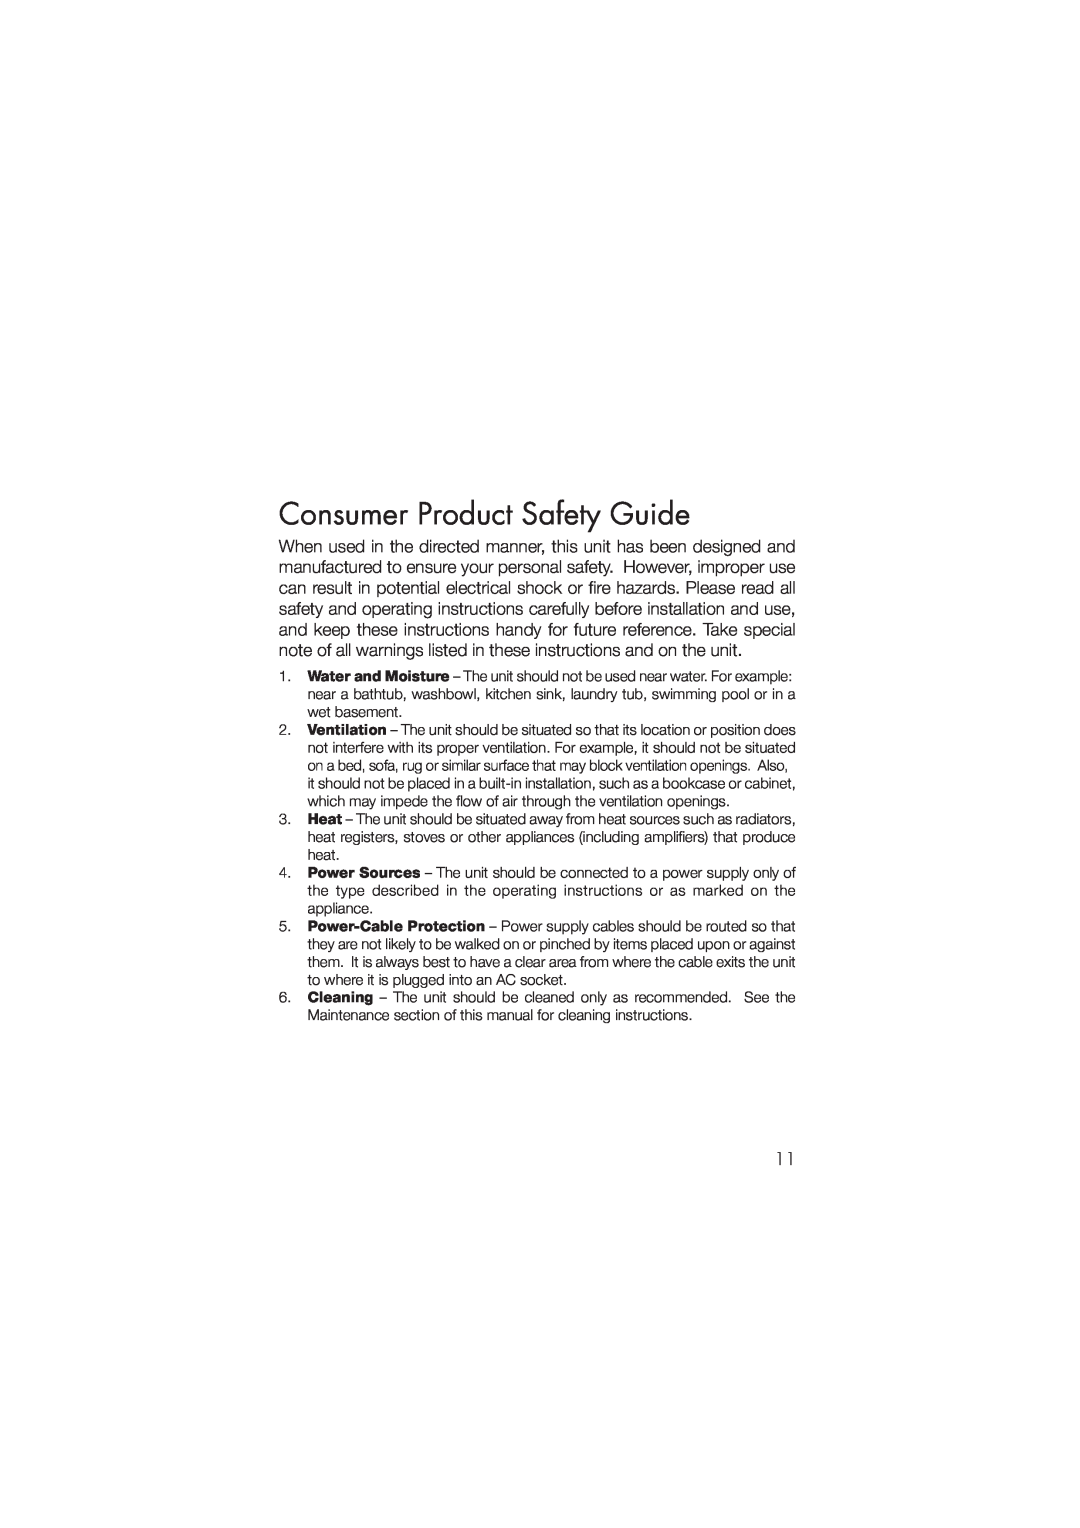 iHome ia5 instruction manual Consumer Product Safety Guide 